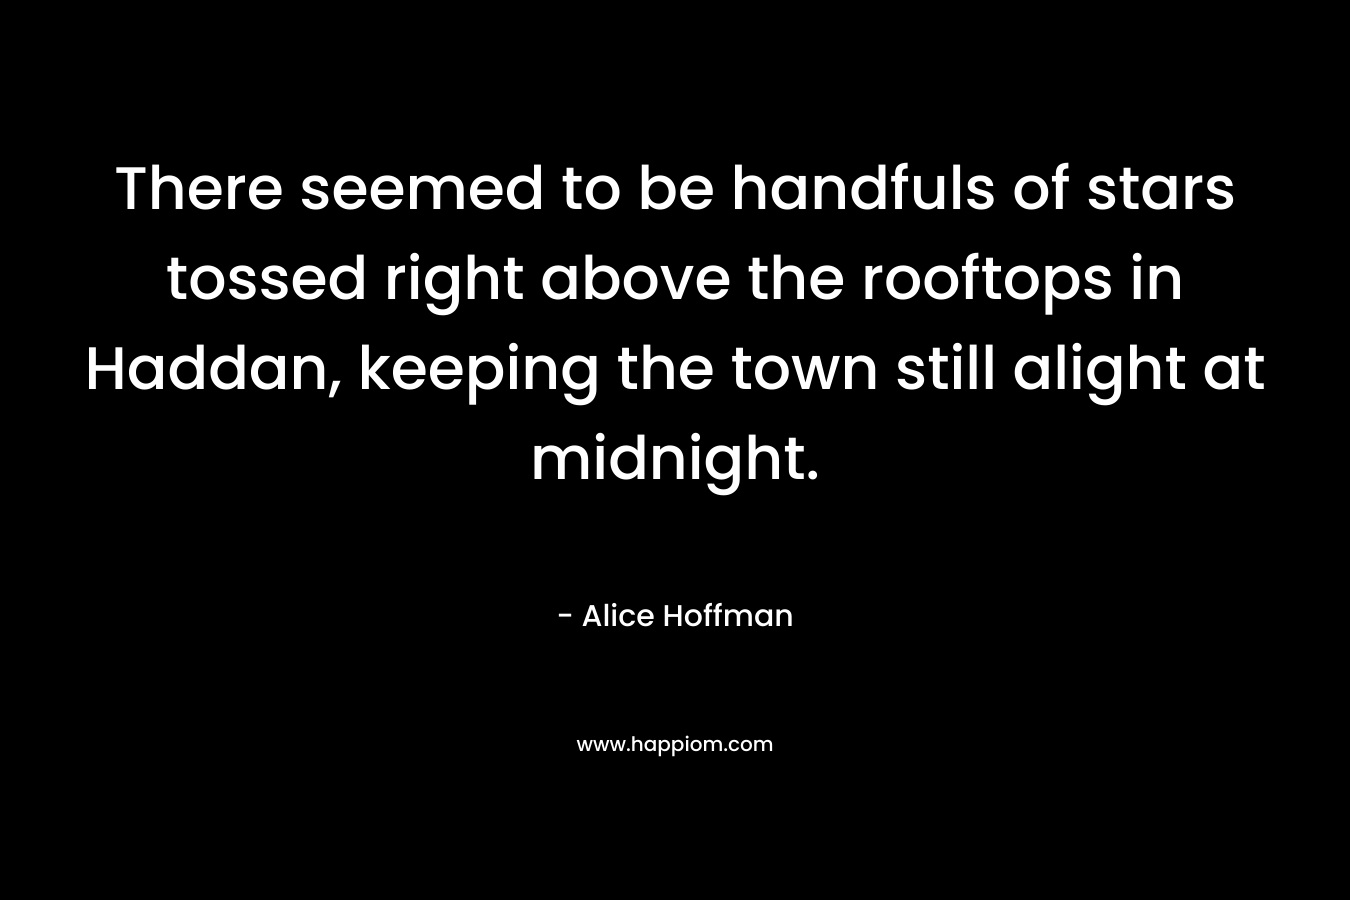 There seemed to be handfuls of stars tossed right above the rooftops in Haddan, keeping the town still alight at midnight.